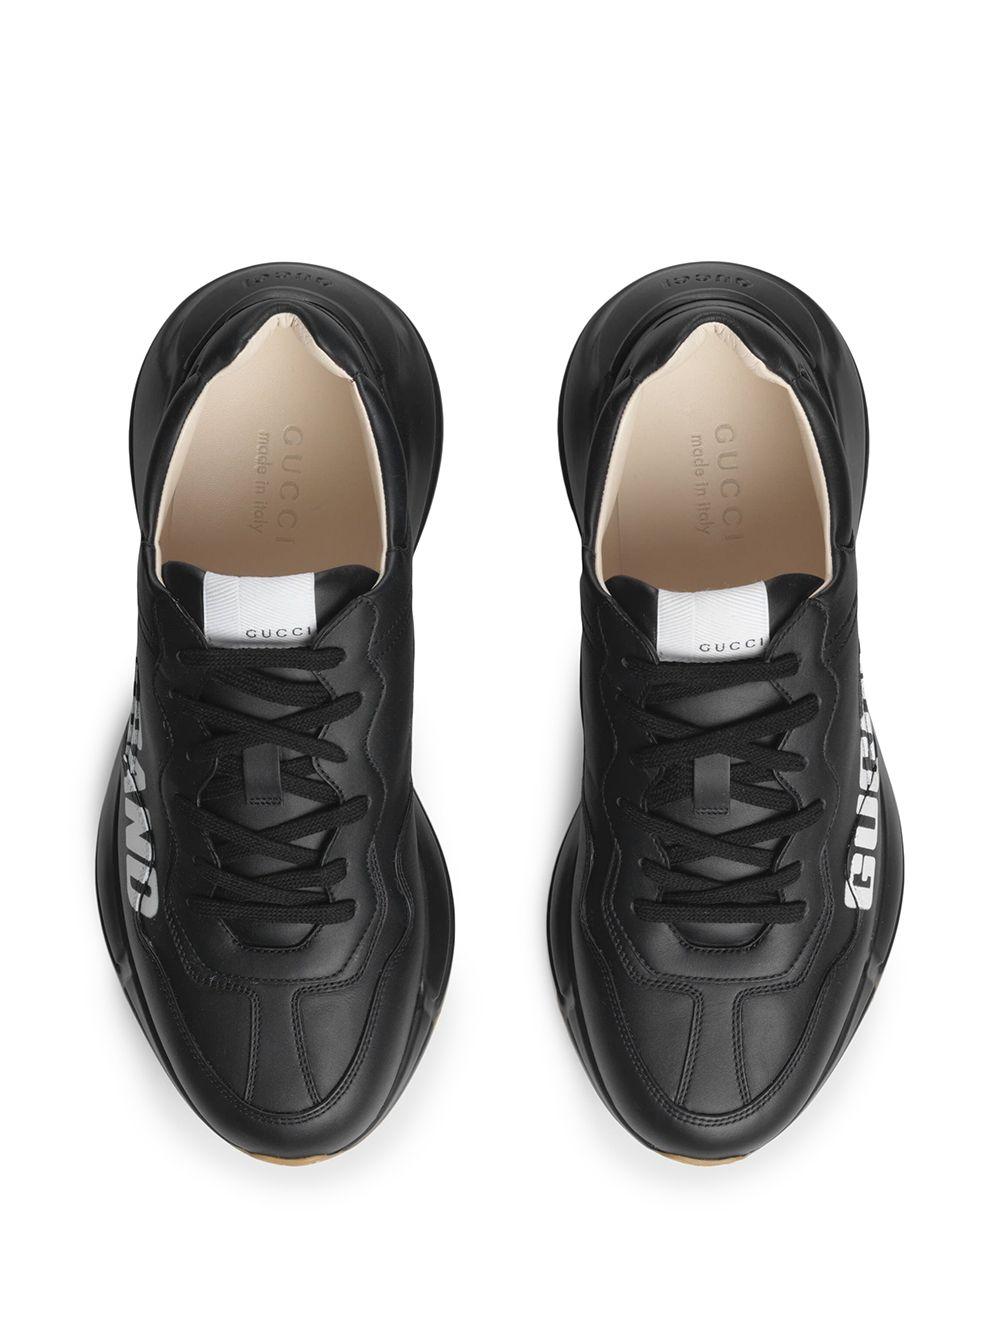 Gucci Leather Rhyton Band Sneakers in Black for Men - Save 12% - Lyst